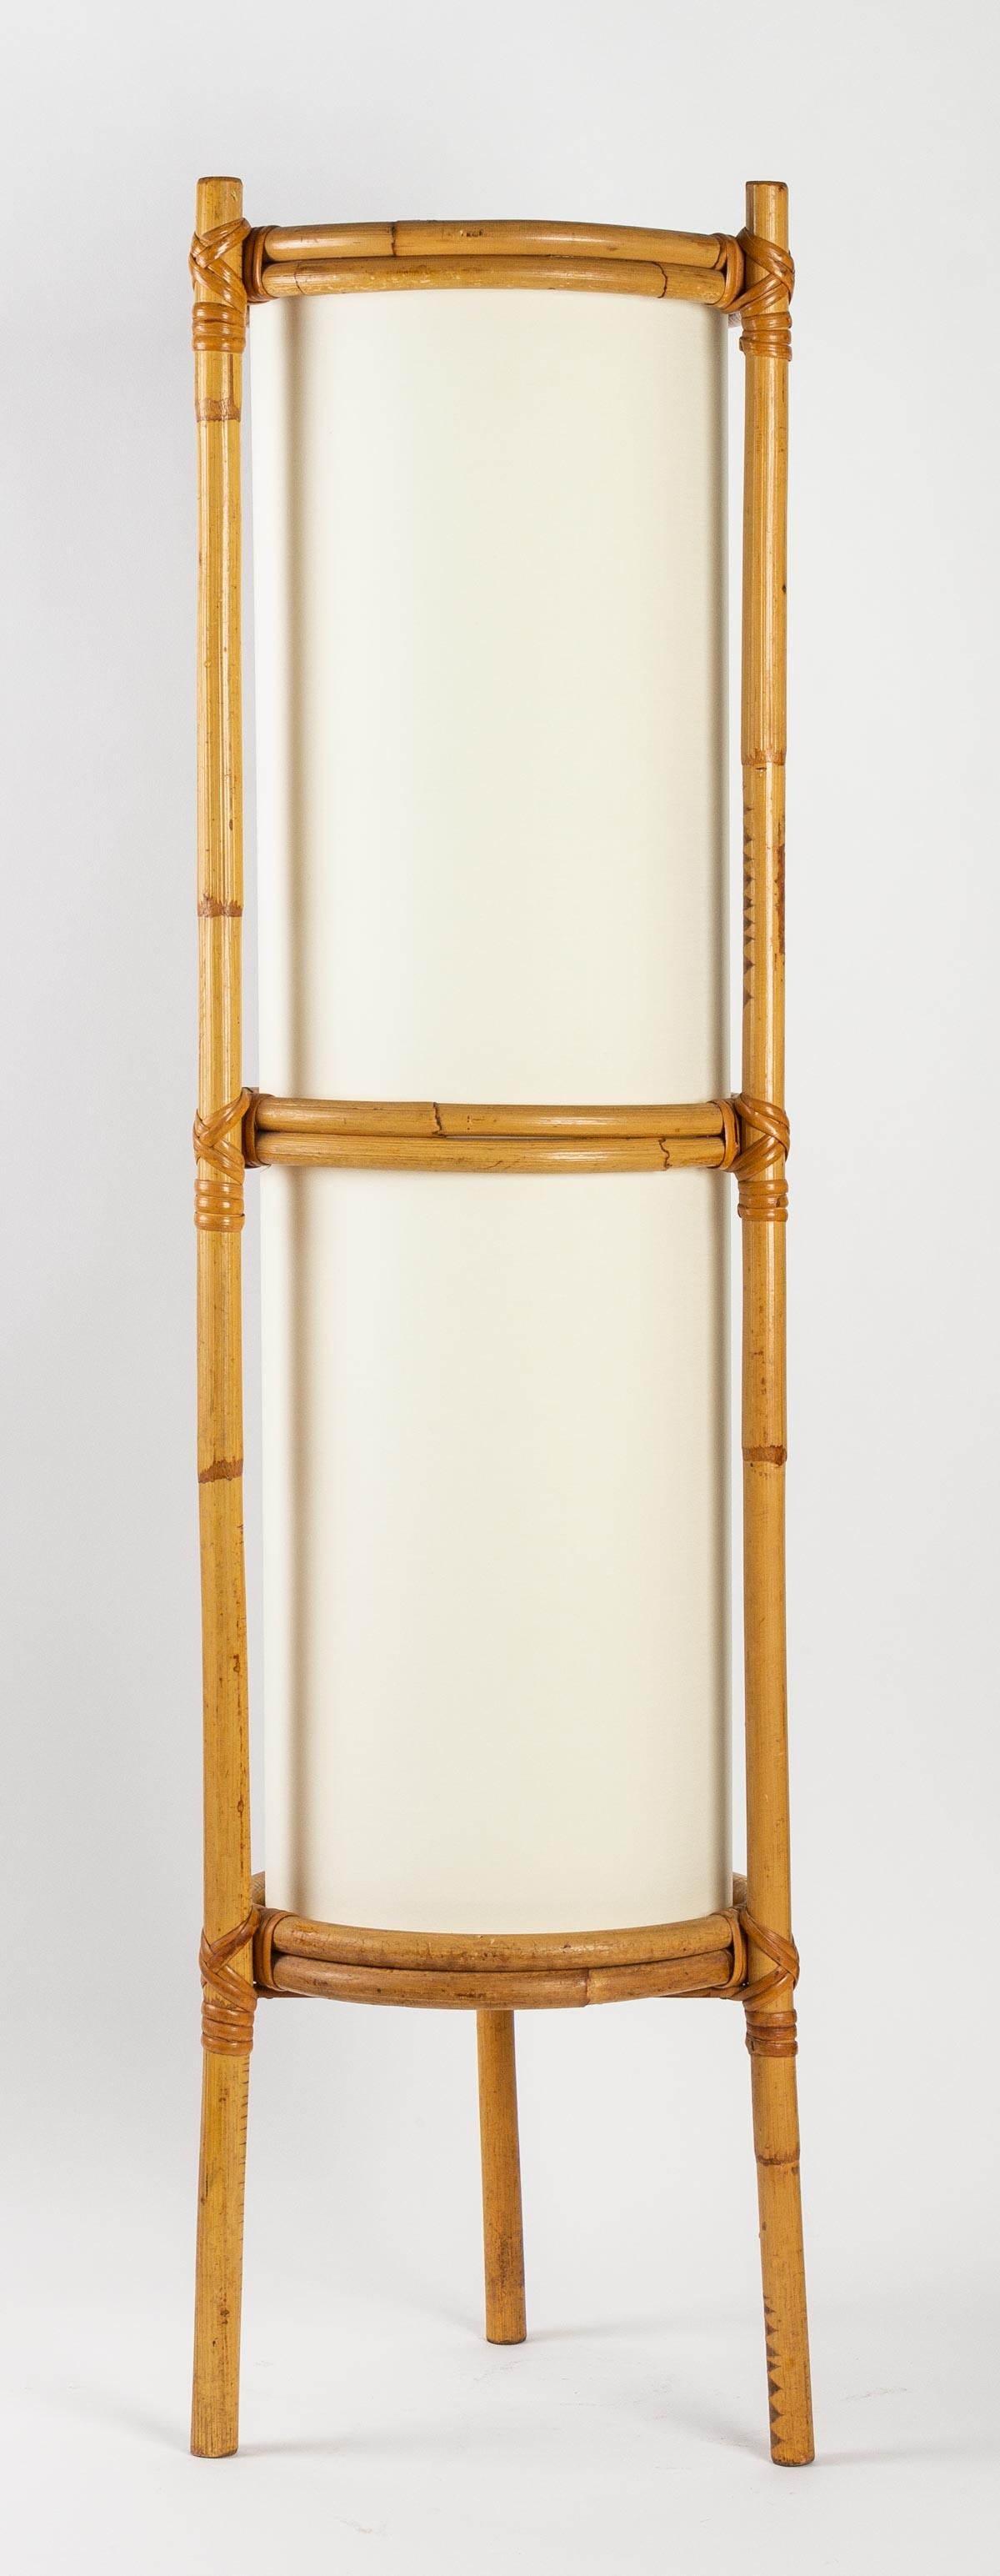 Pair of Louis Sognot bamboo floor lamps, 1950
Composed of a cylindrical rattan structure formed of 3 vertical rods resting on the ground on the lower part acting as feet and 3 horizontal rings at regular intervals on the upper part inside which is